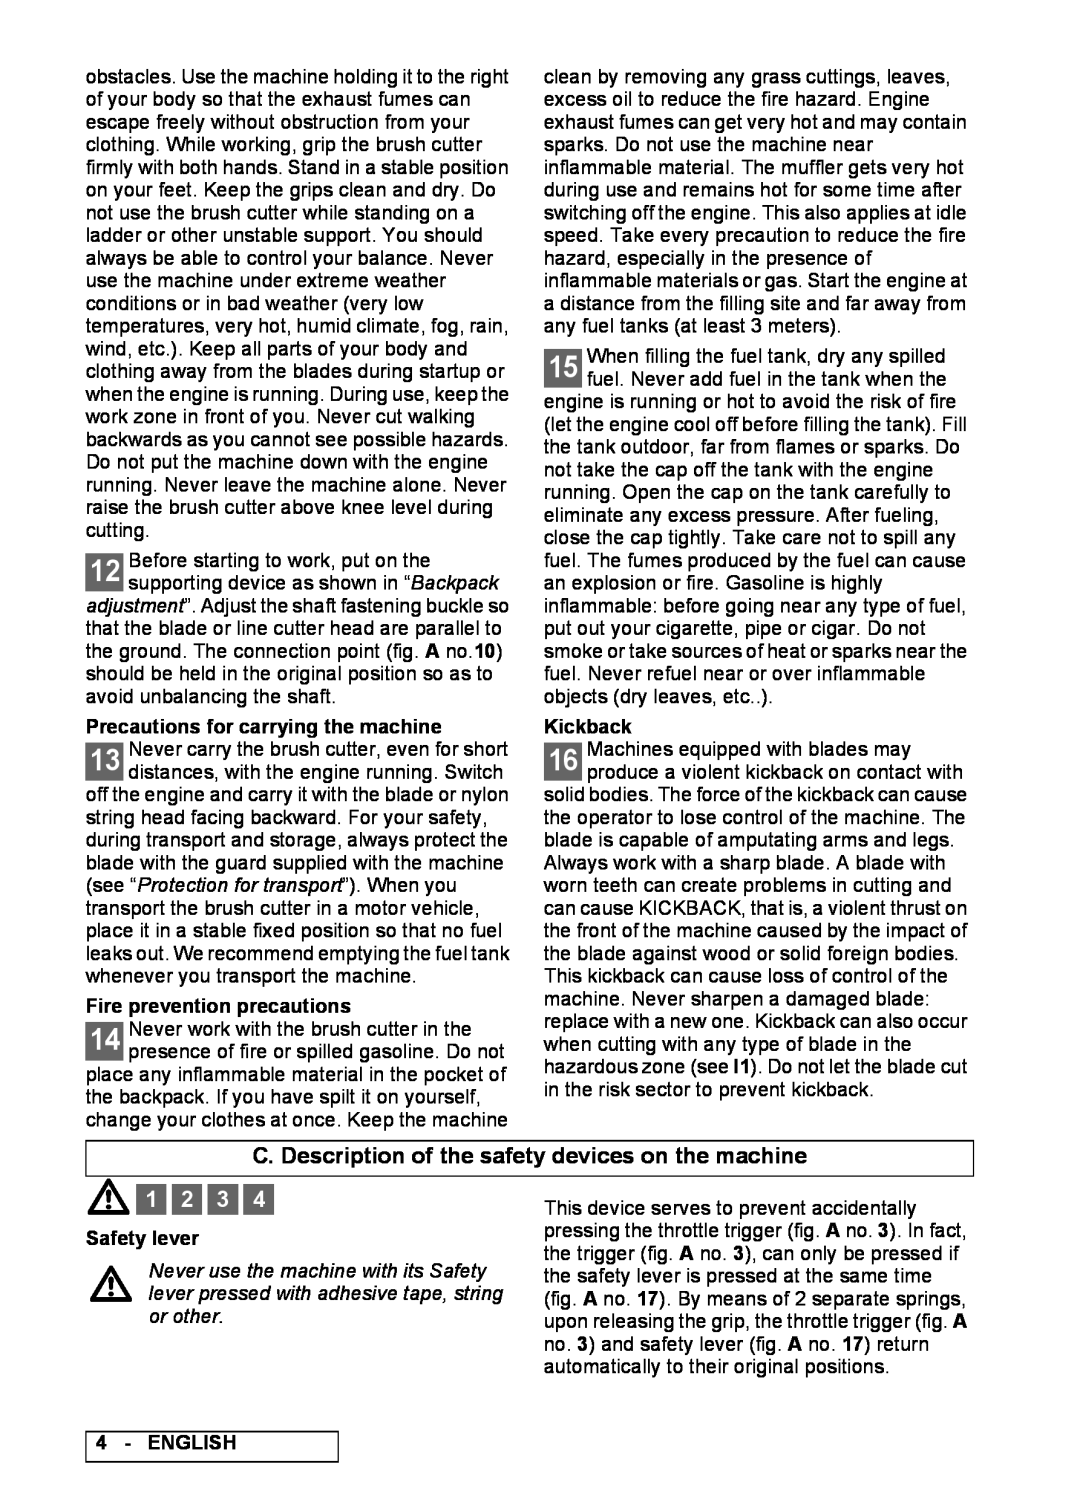 Electrolux 95390039300 C. Description of the safety devices on the machine, Precautions for carrying the machine, Kickback 